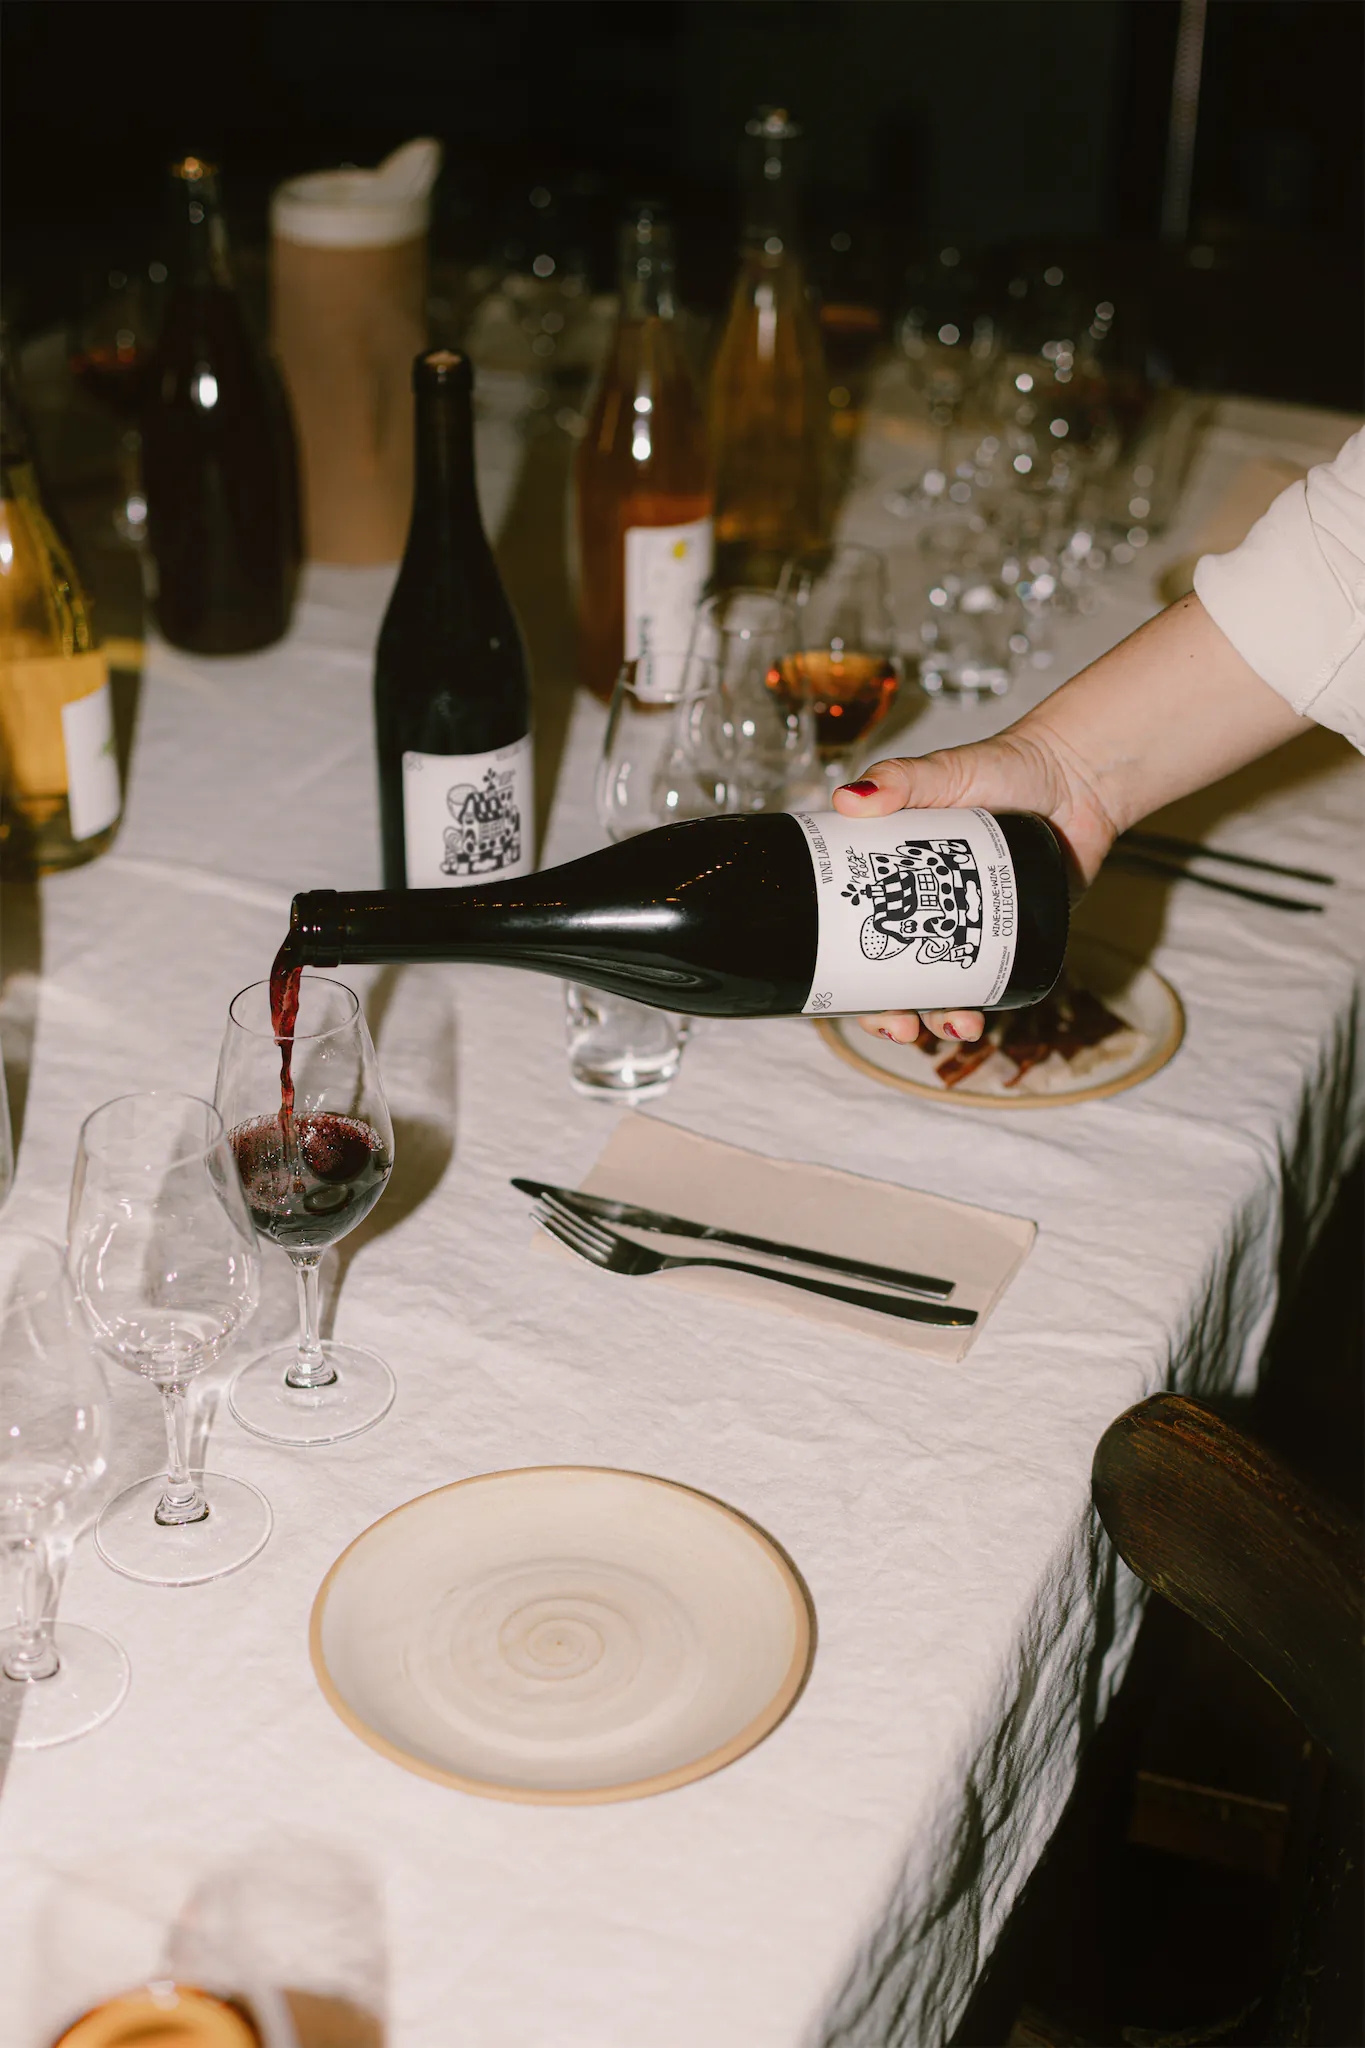 Wine label PSD mockup. Wine being poured from a bottle mockup. Wine bottle mockup in a restaurant table full of meals and dishes. Wine packaging mockup. Restaurant mockup. Wine bar mockup.